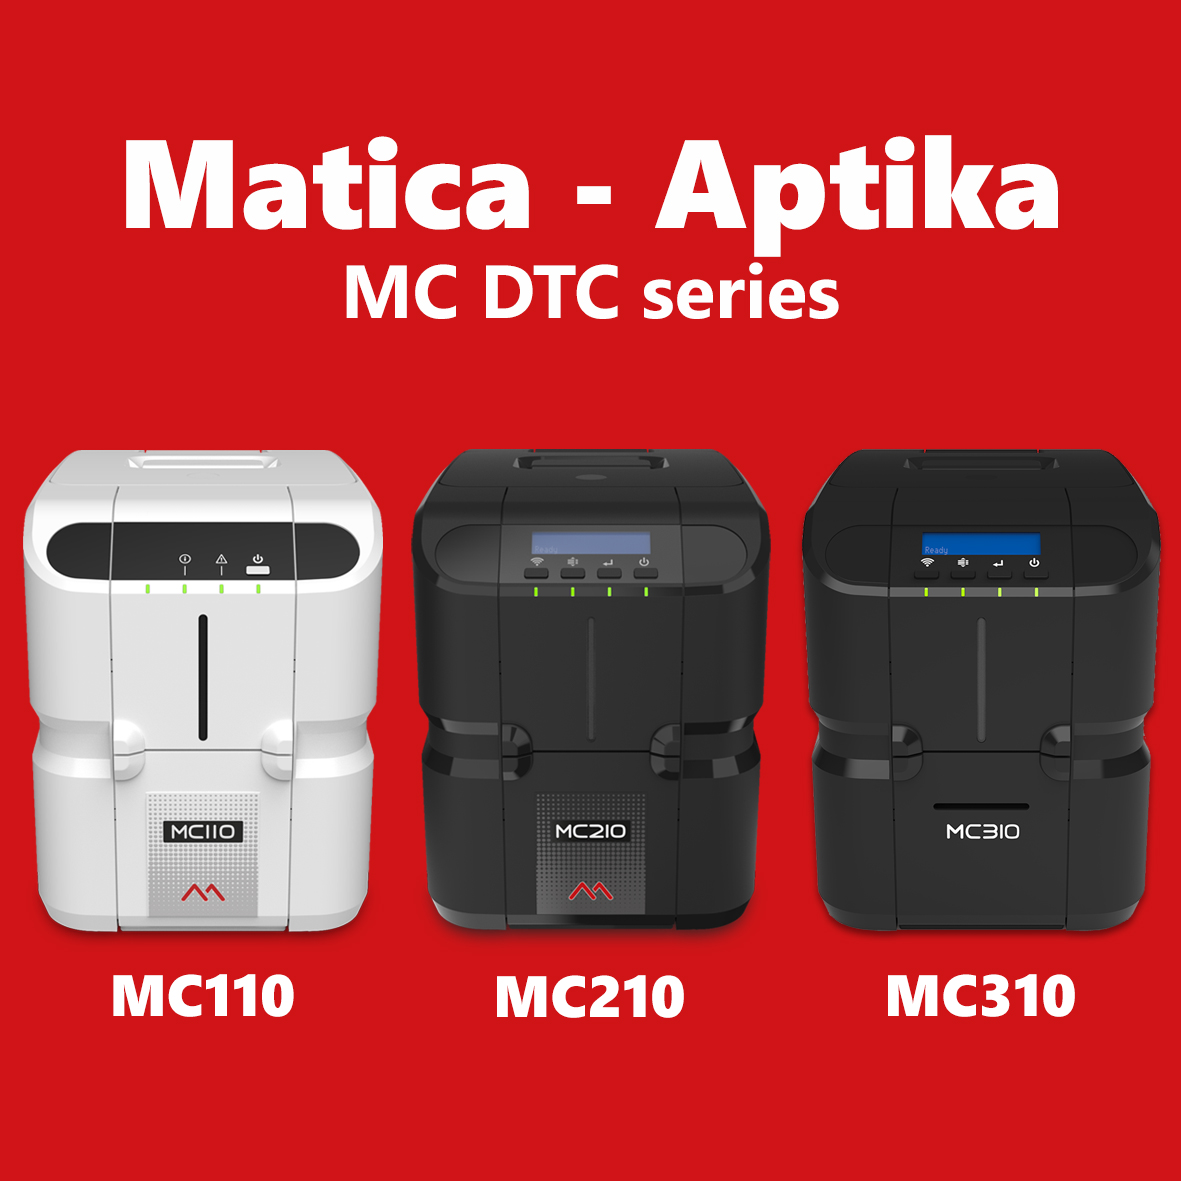 Aptika partners with Matica to offer our Canadian and US customers the MC110, MC210, and MC310 direct-to-card printers